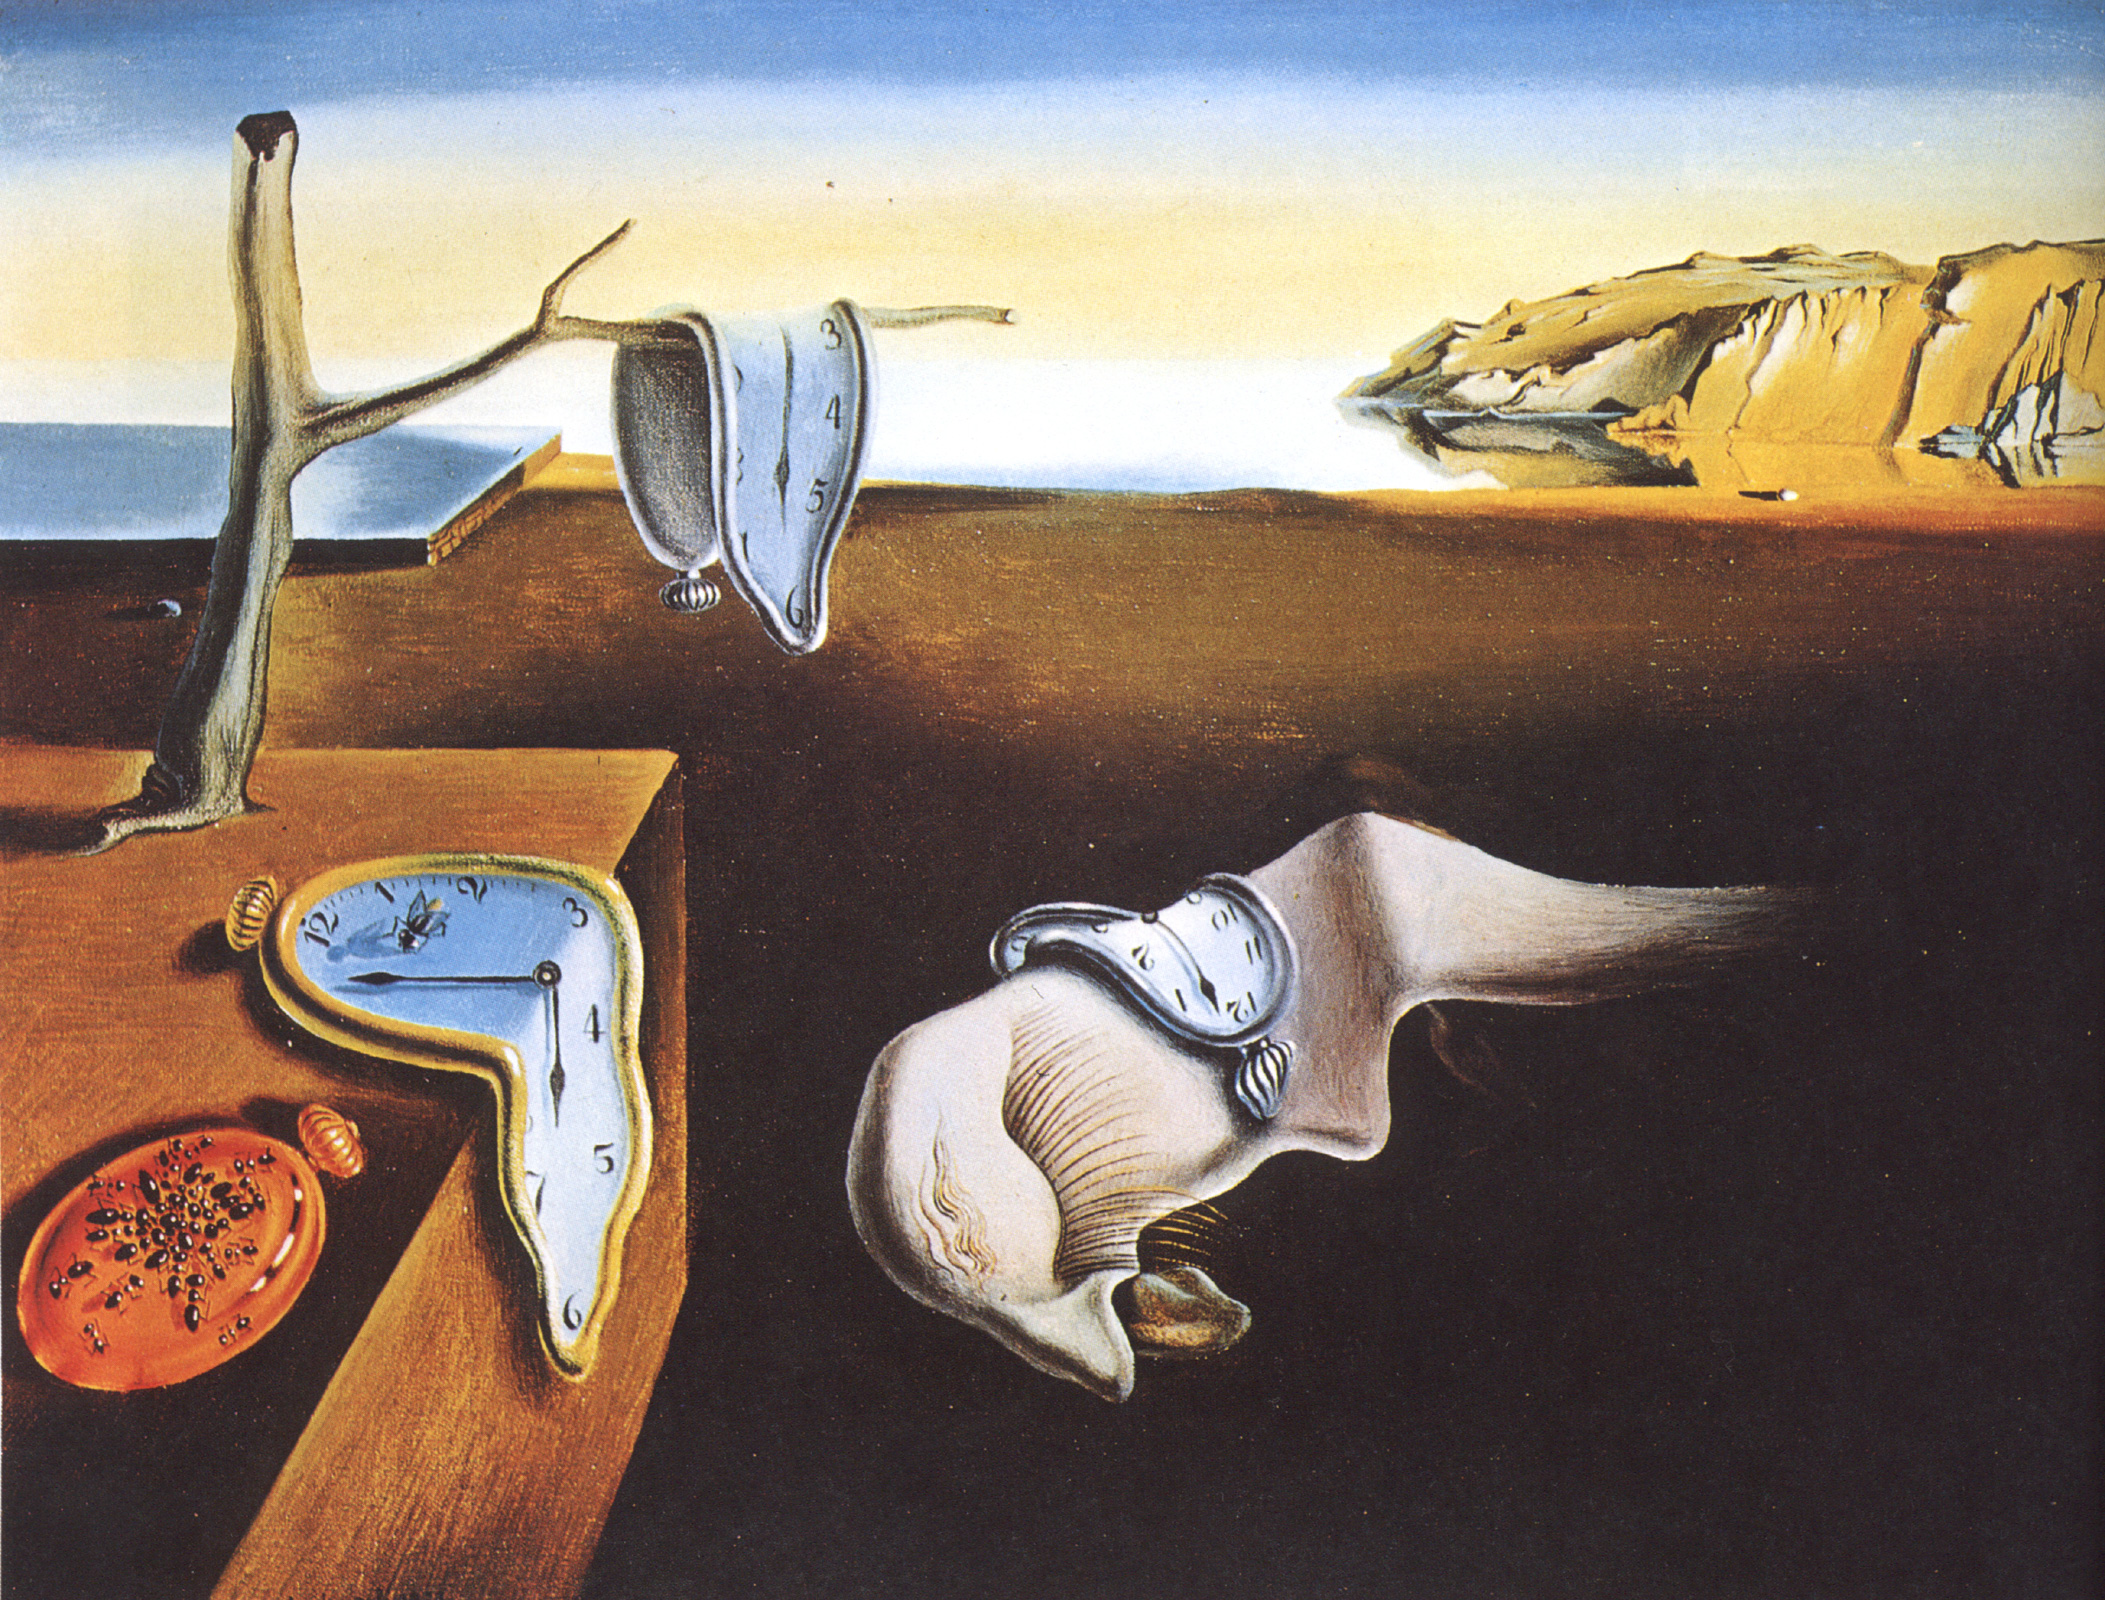 uploads6.wikiart.org/images/salvador-dali/the-p...